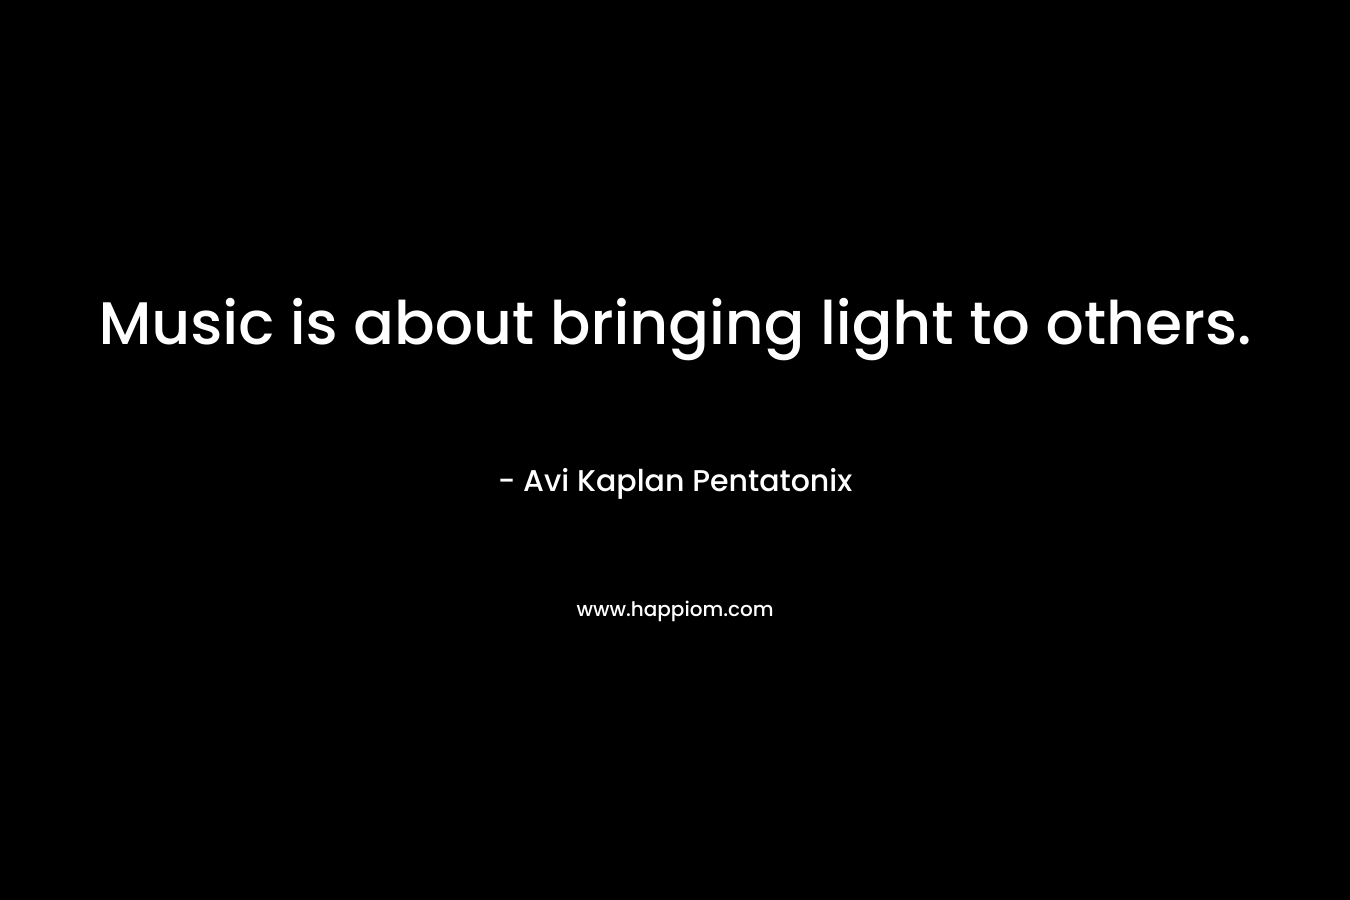 Music is about bringing light to others.